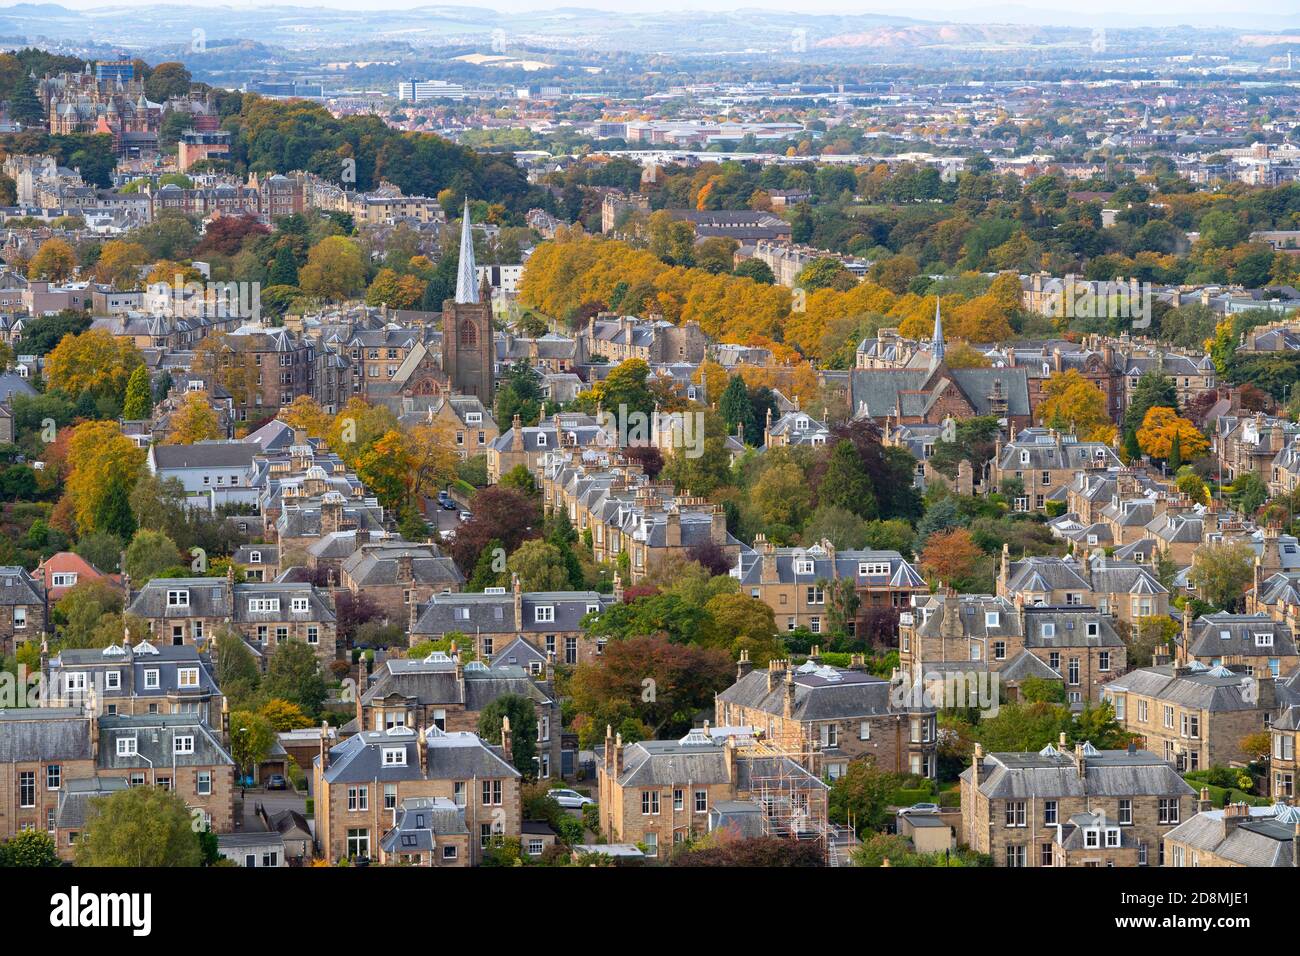 View of large houses in Morningside district of Edinburgh, Scotland, Uk Stock Photo